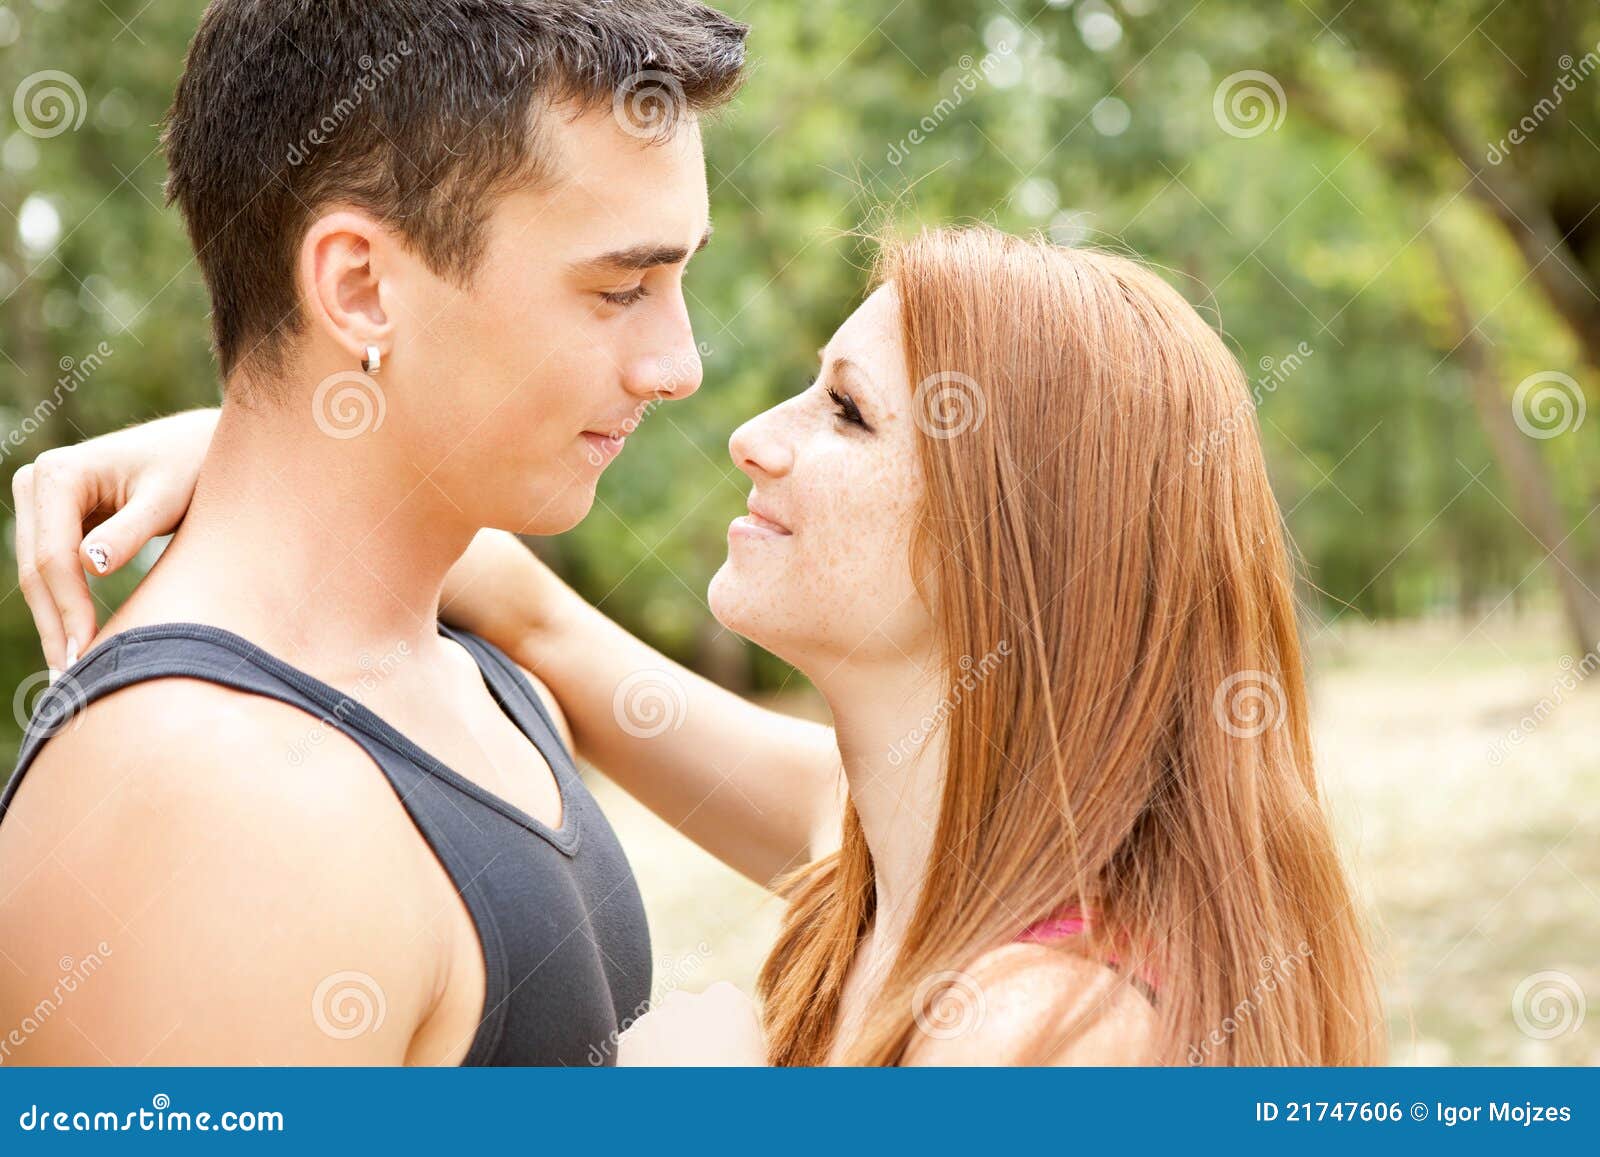 Download free photo of Couple,embrace,love,woman,man - from